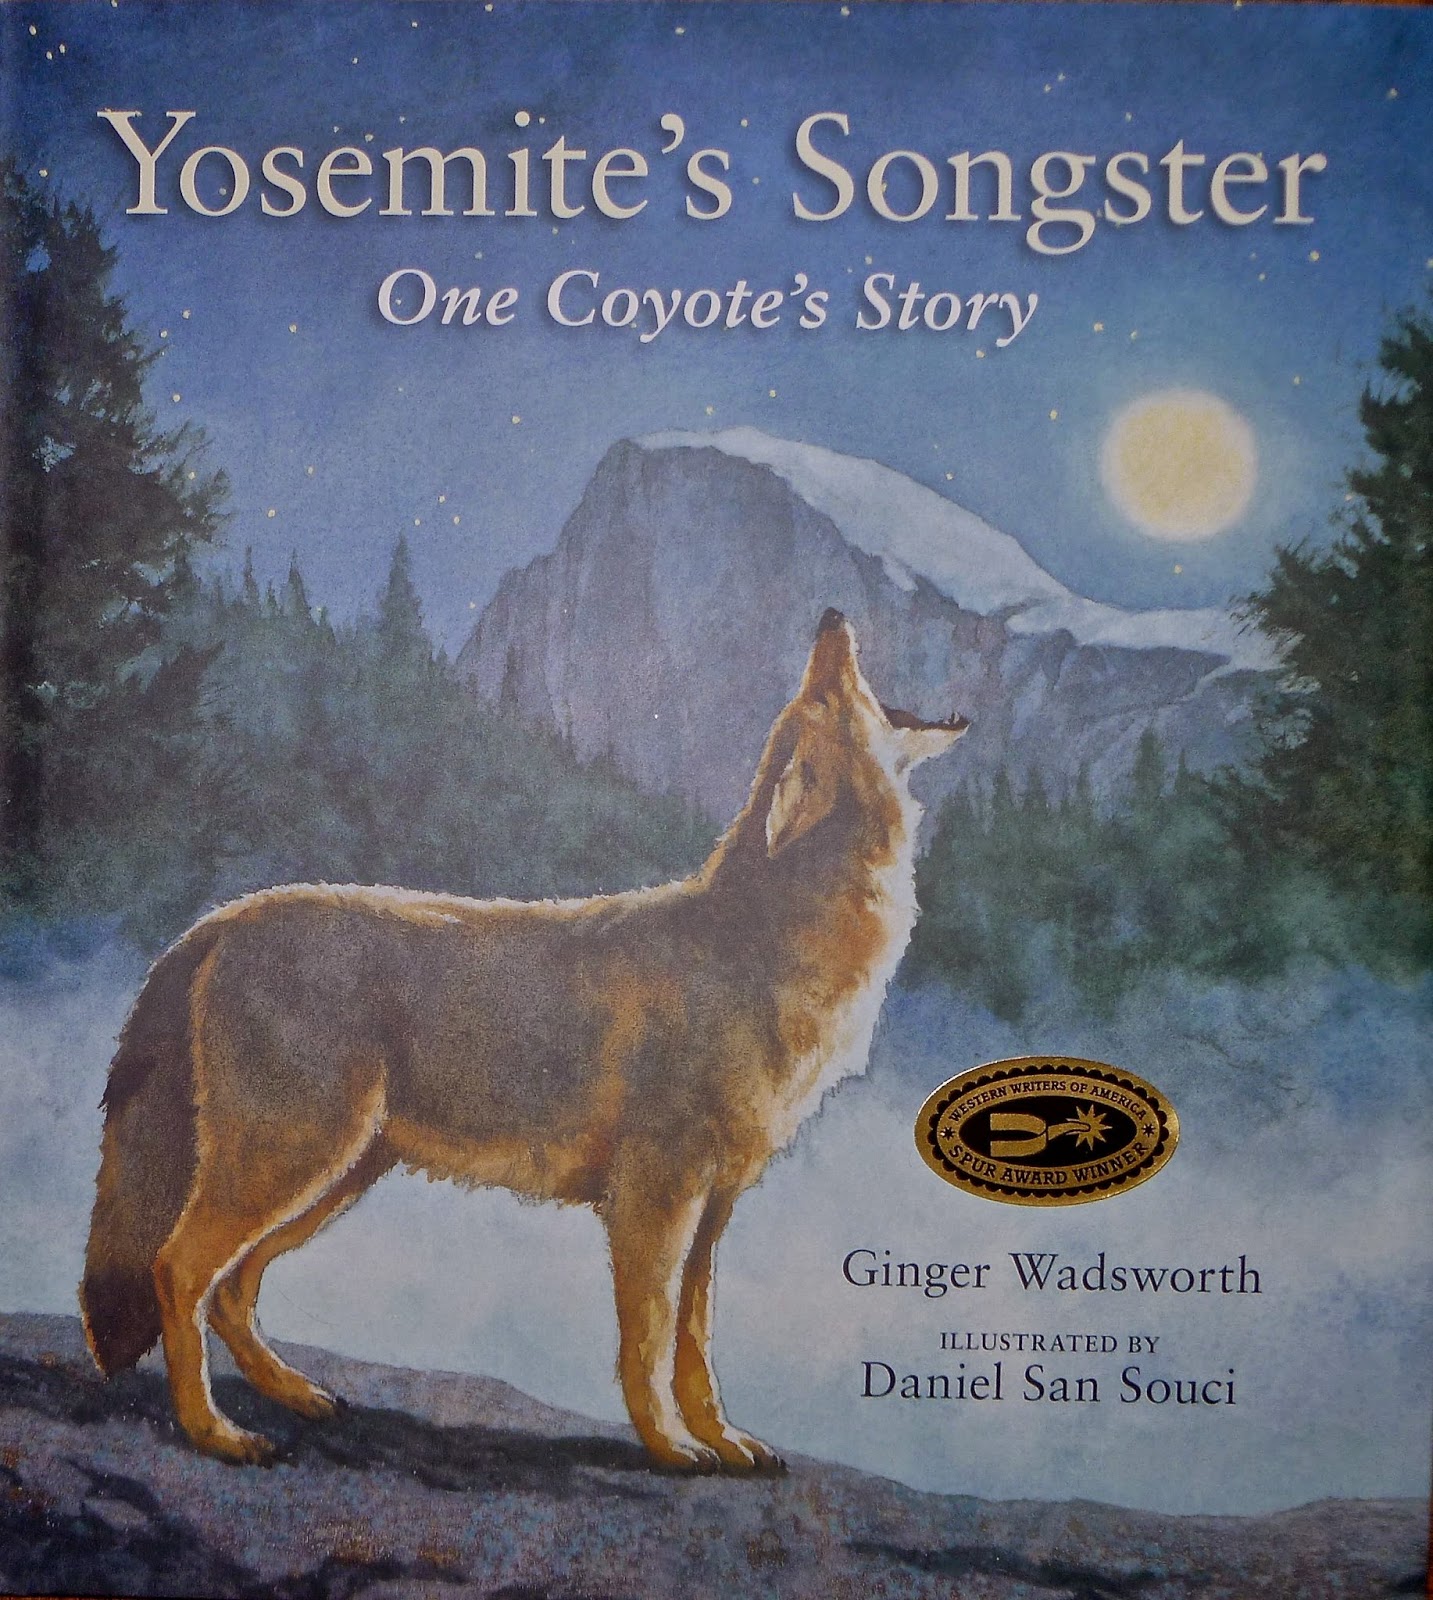 Author Interview: Ginger Wadsworth on Yosemite’s Songster: One Coyote’s Story